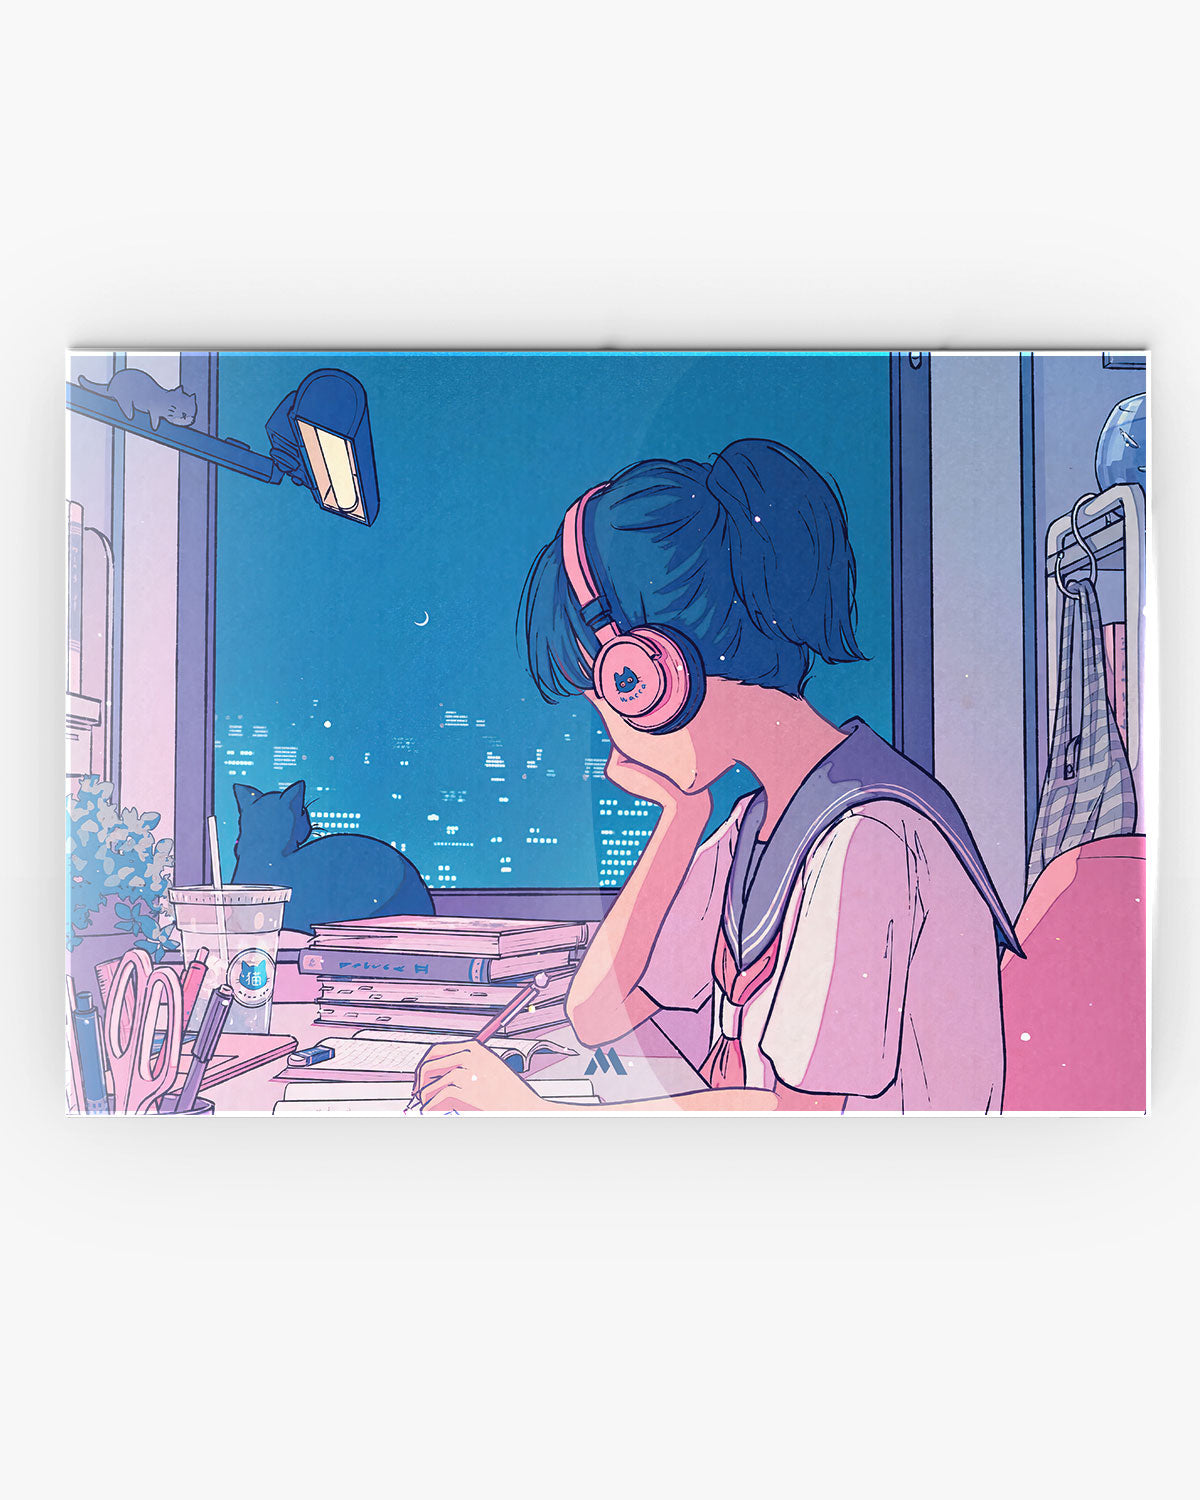 Poster Best Anime Girls Beautiful Anime Scenery Aesthetic Hd Lofi Anime Hd  Matte Finish Paper Poster Print 12 x 18 Inch (Multicolor)PB-26904 :  Amazon.in: Home & Kitchen